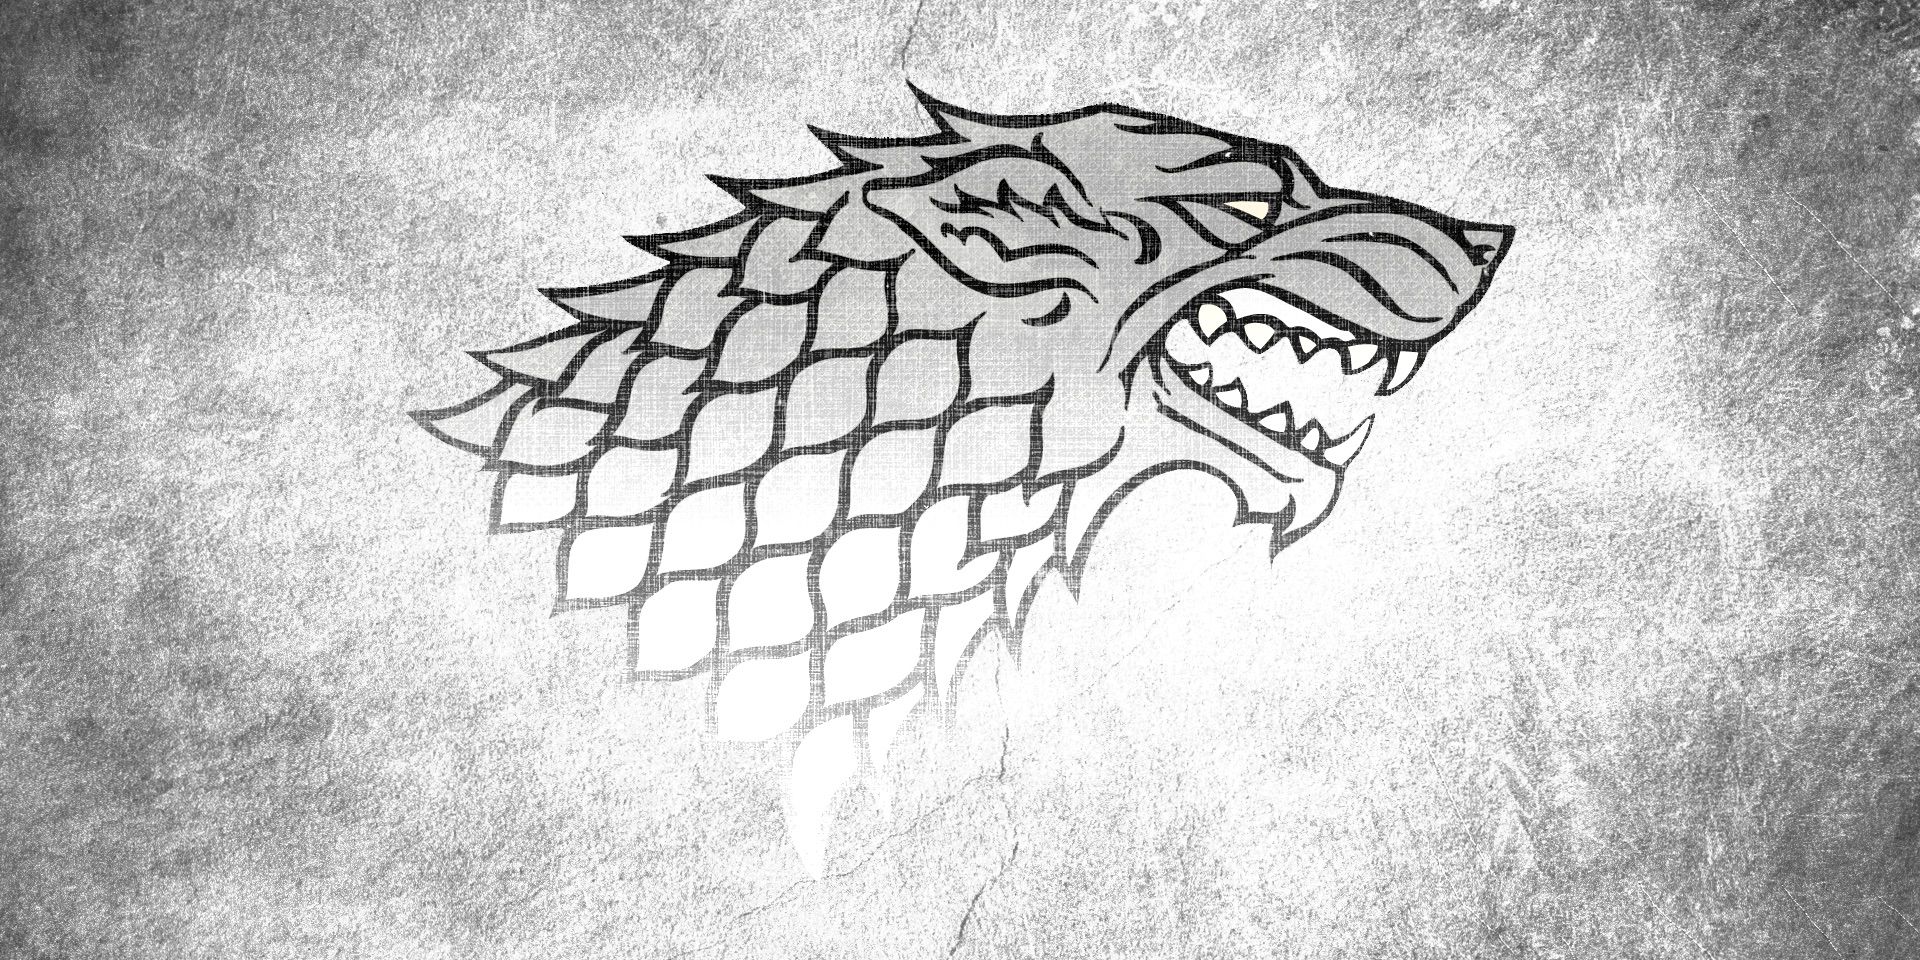 House Stark Sigil from Game of Thrones